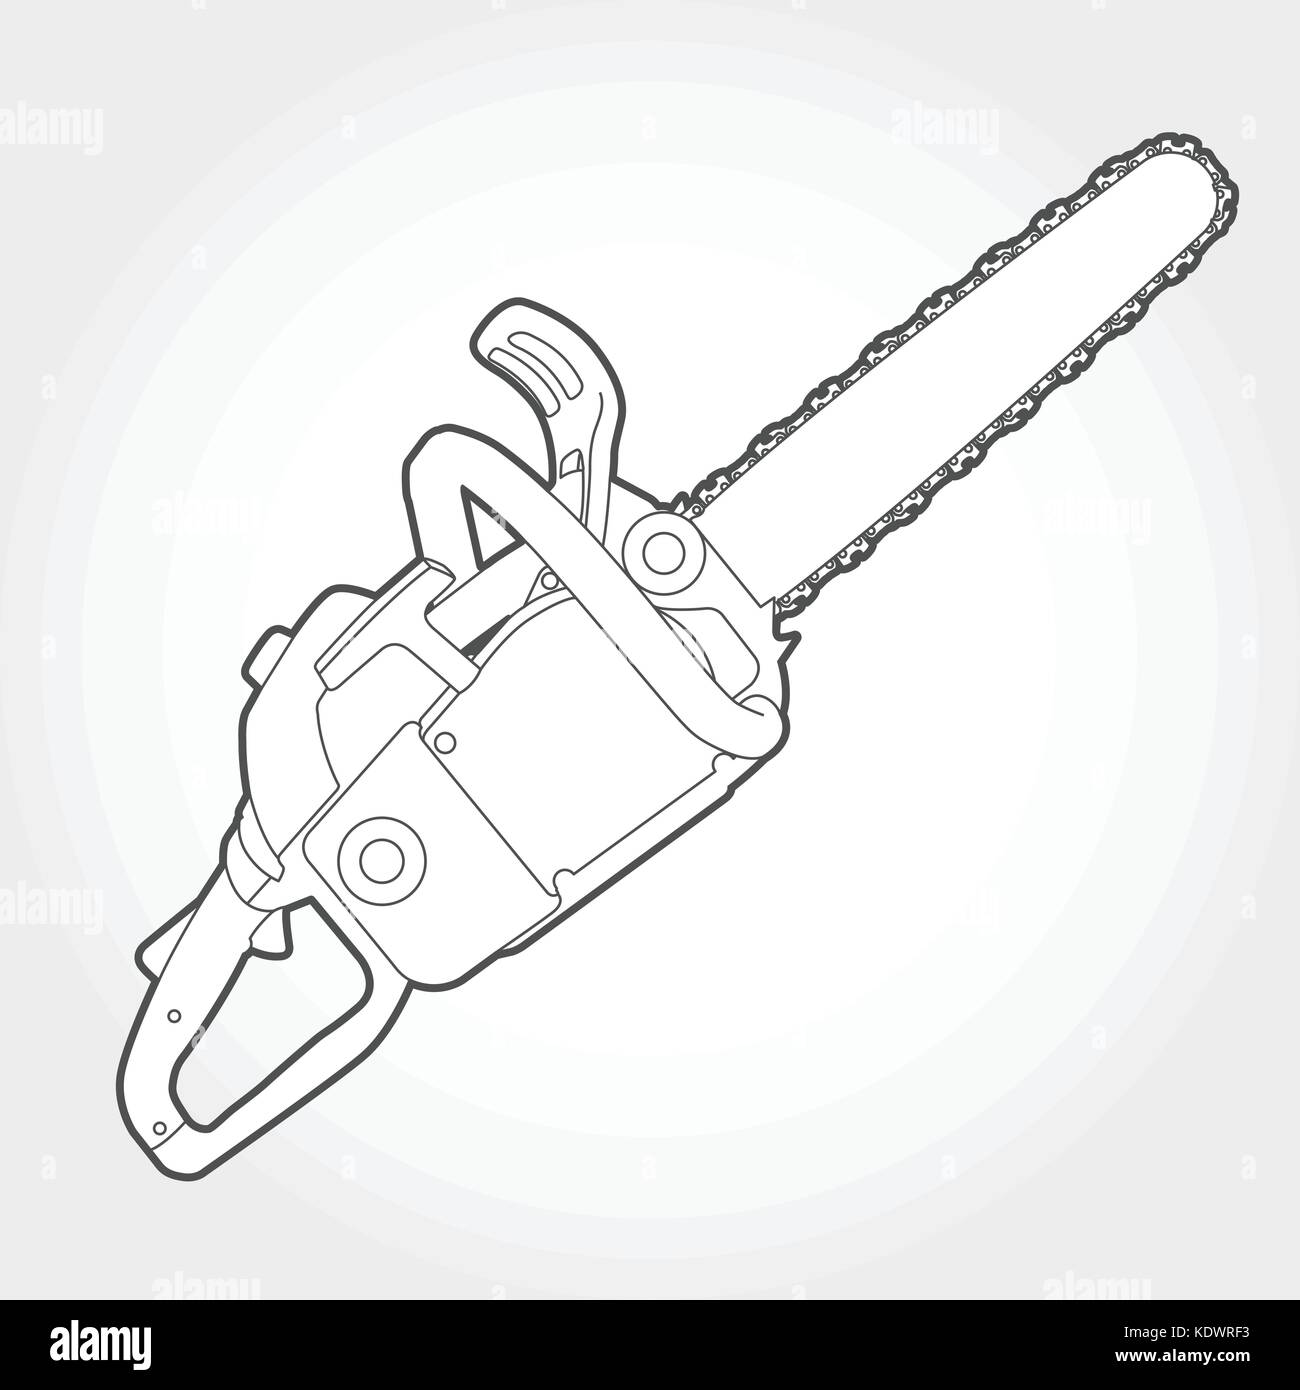 Gasoline-powered chain saw silhouette Stock Vector